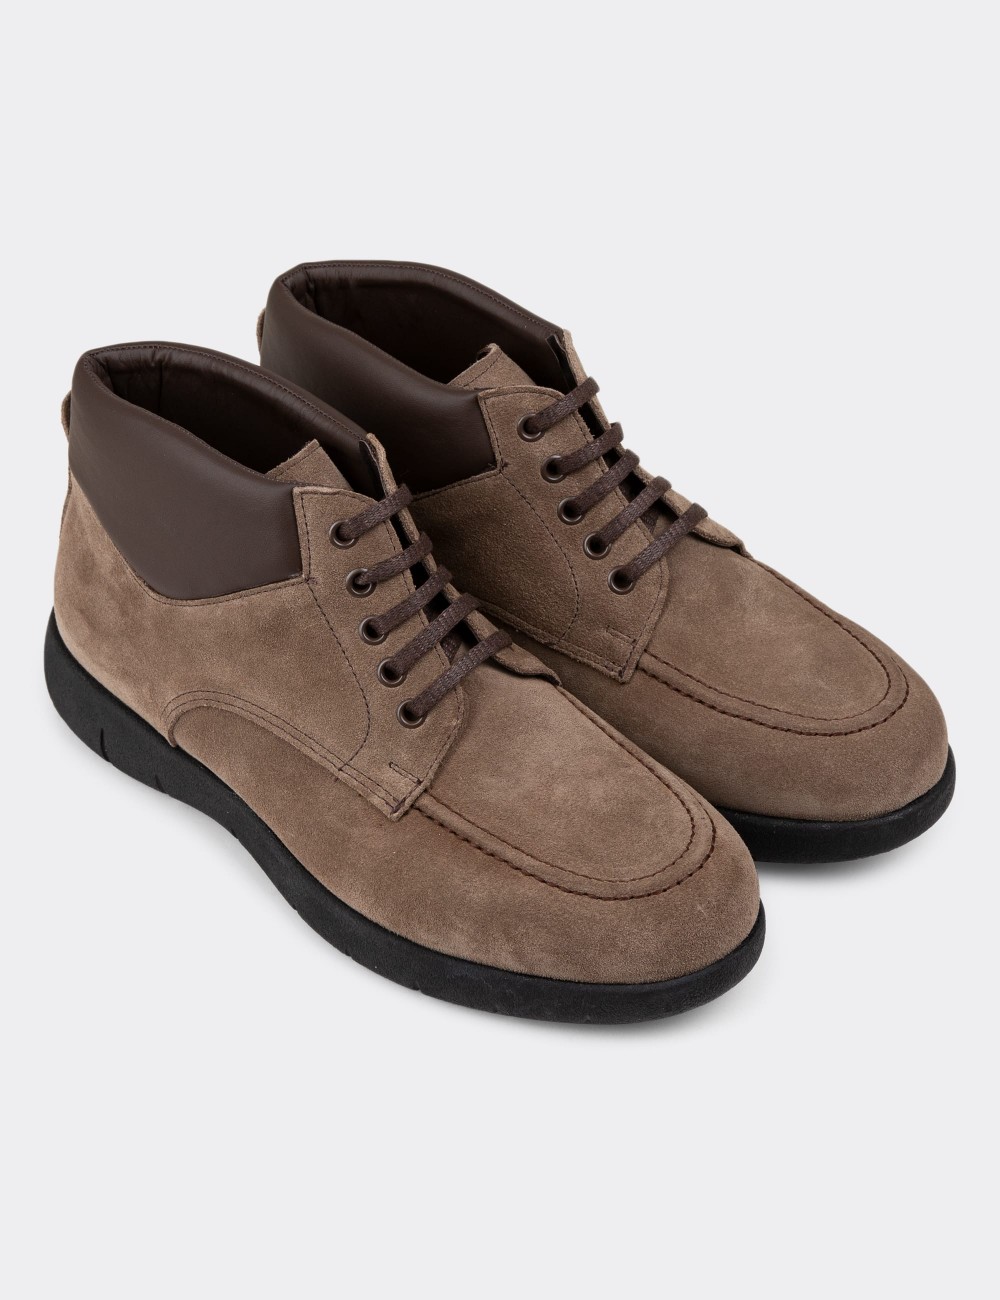 Sandstone Suede Leather Boots - 01928MVZNC01